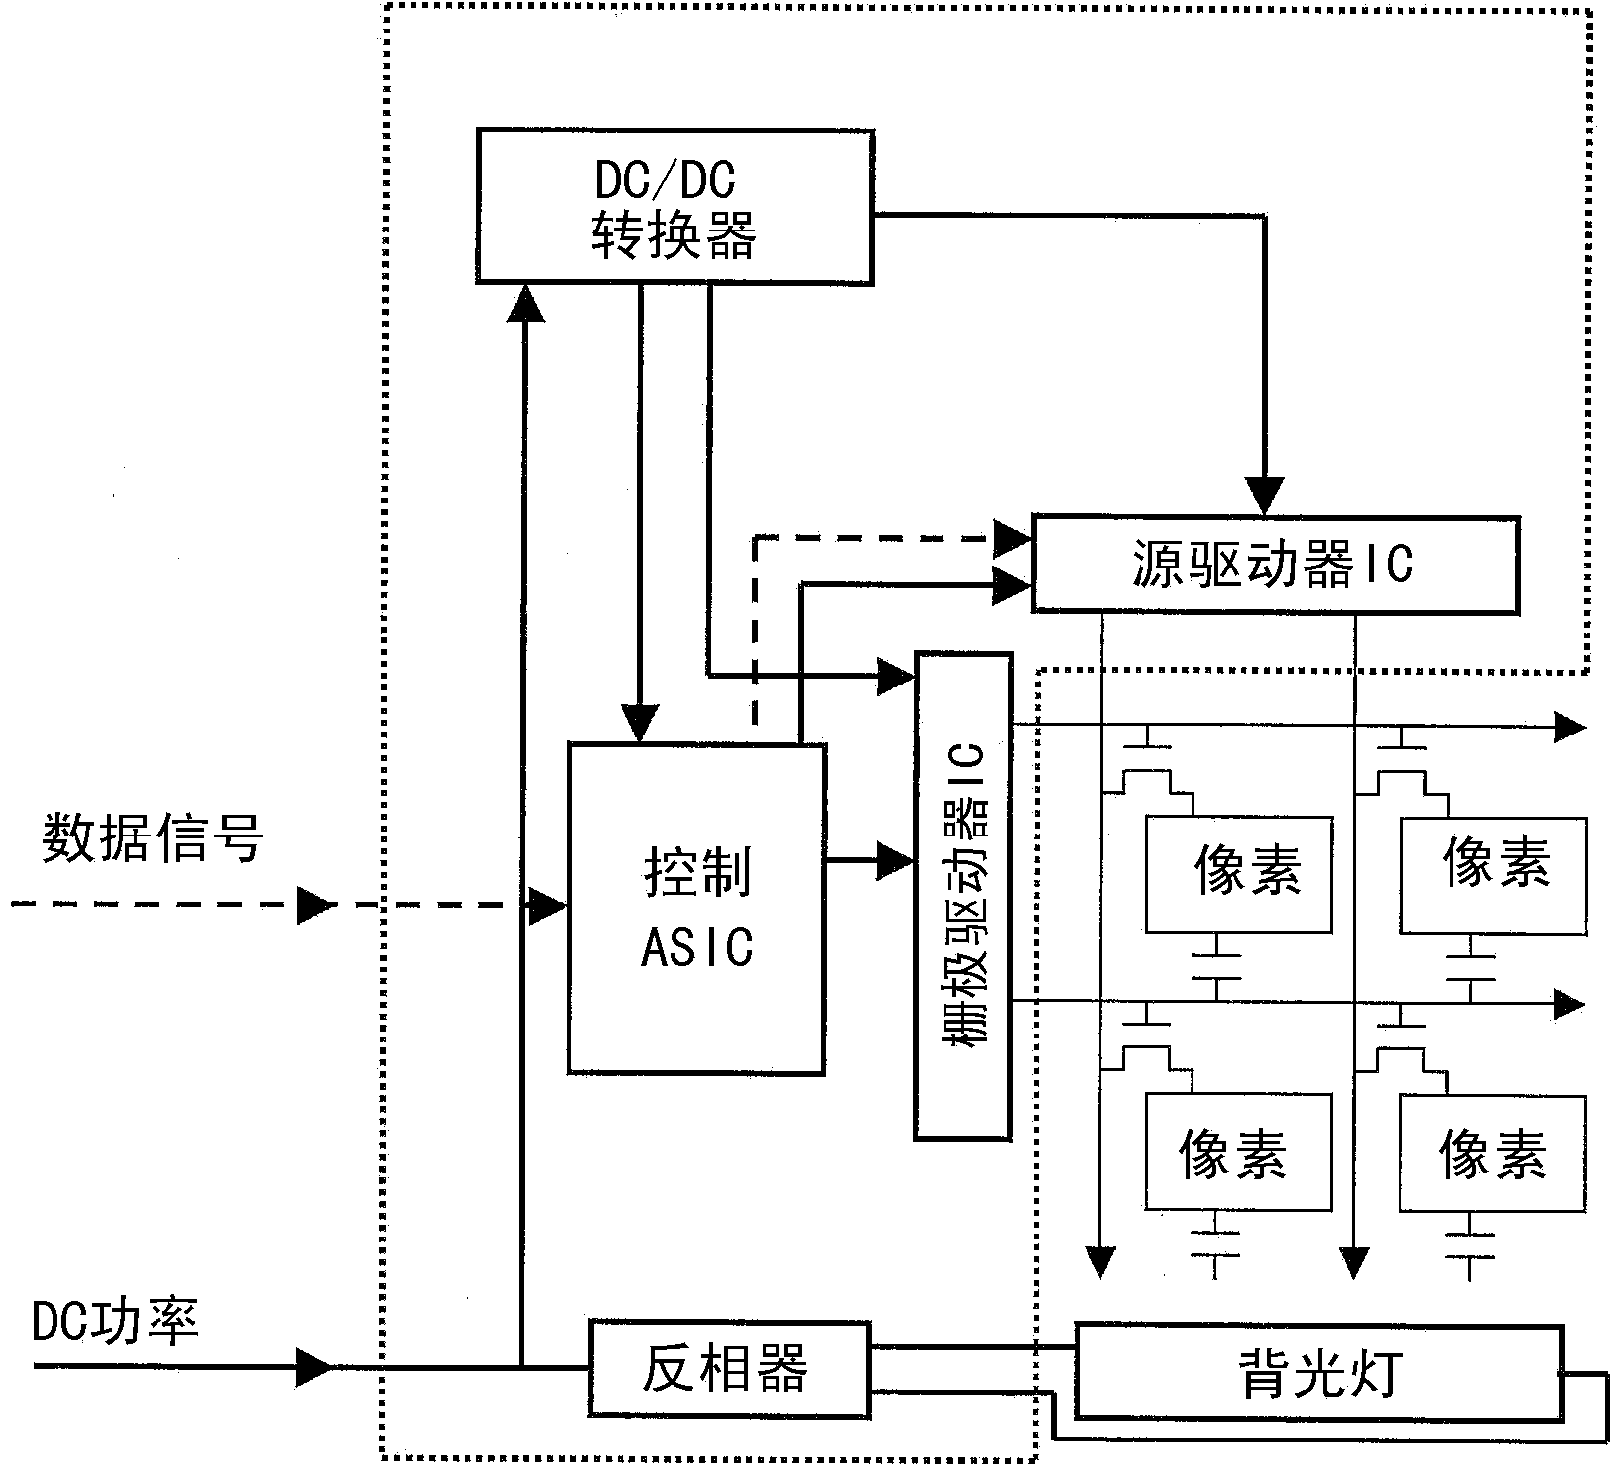 Method of processing image data for image display panel